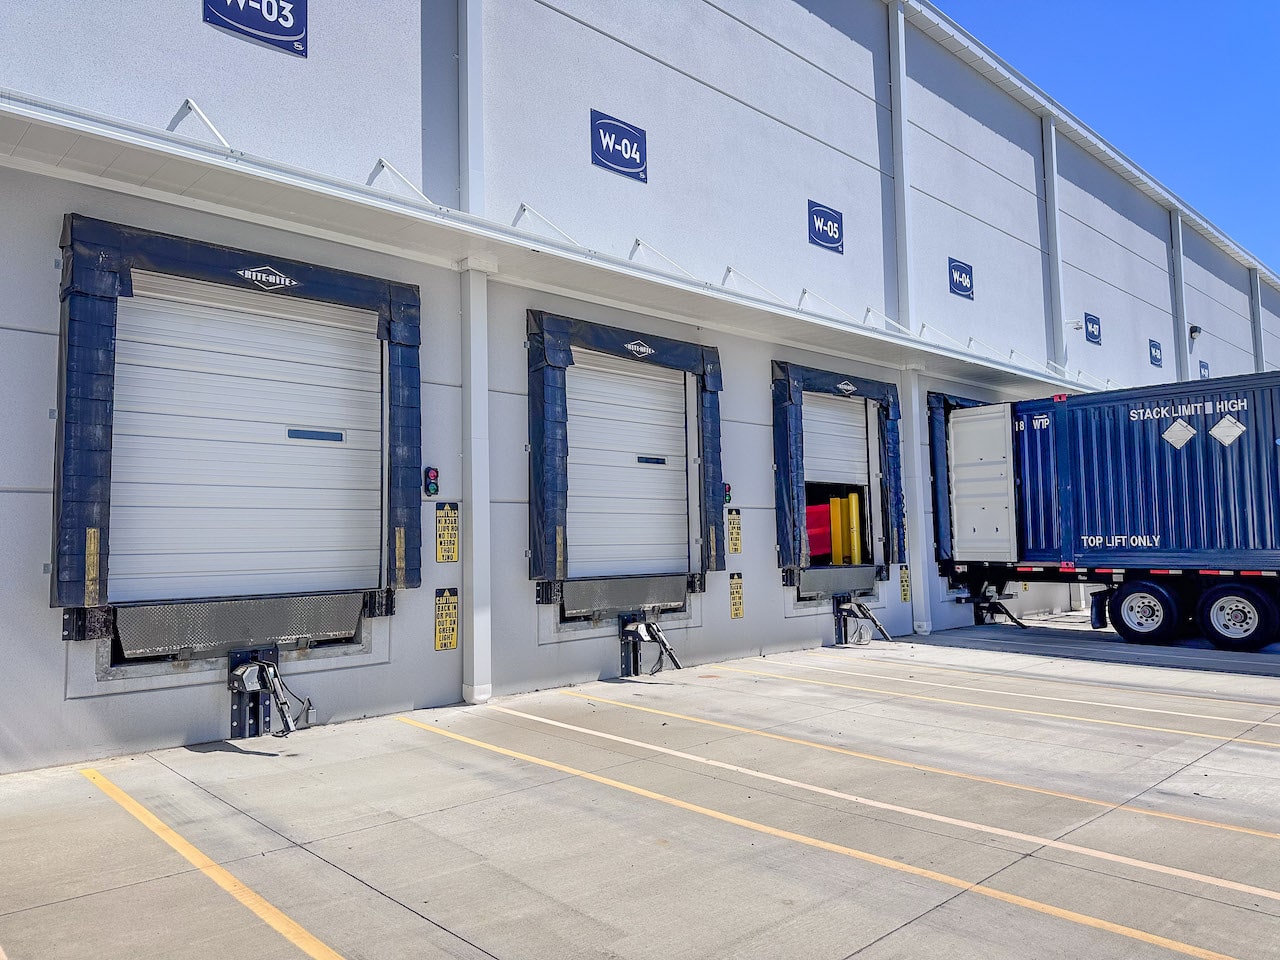 Commercial overhead doors with a truck attached to one of those